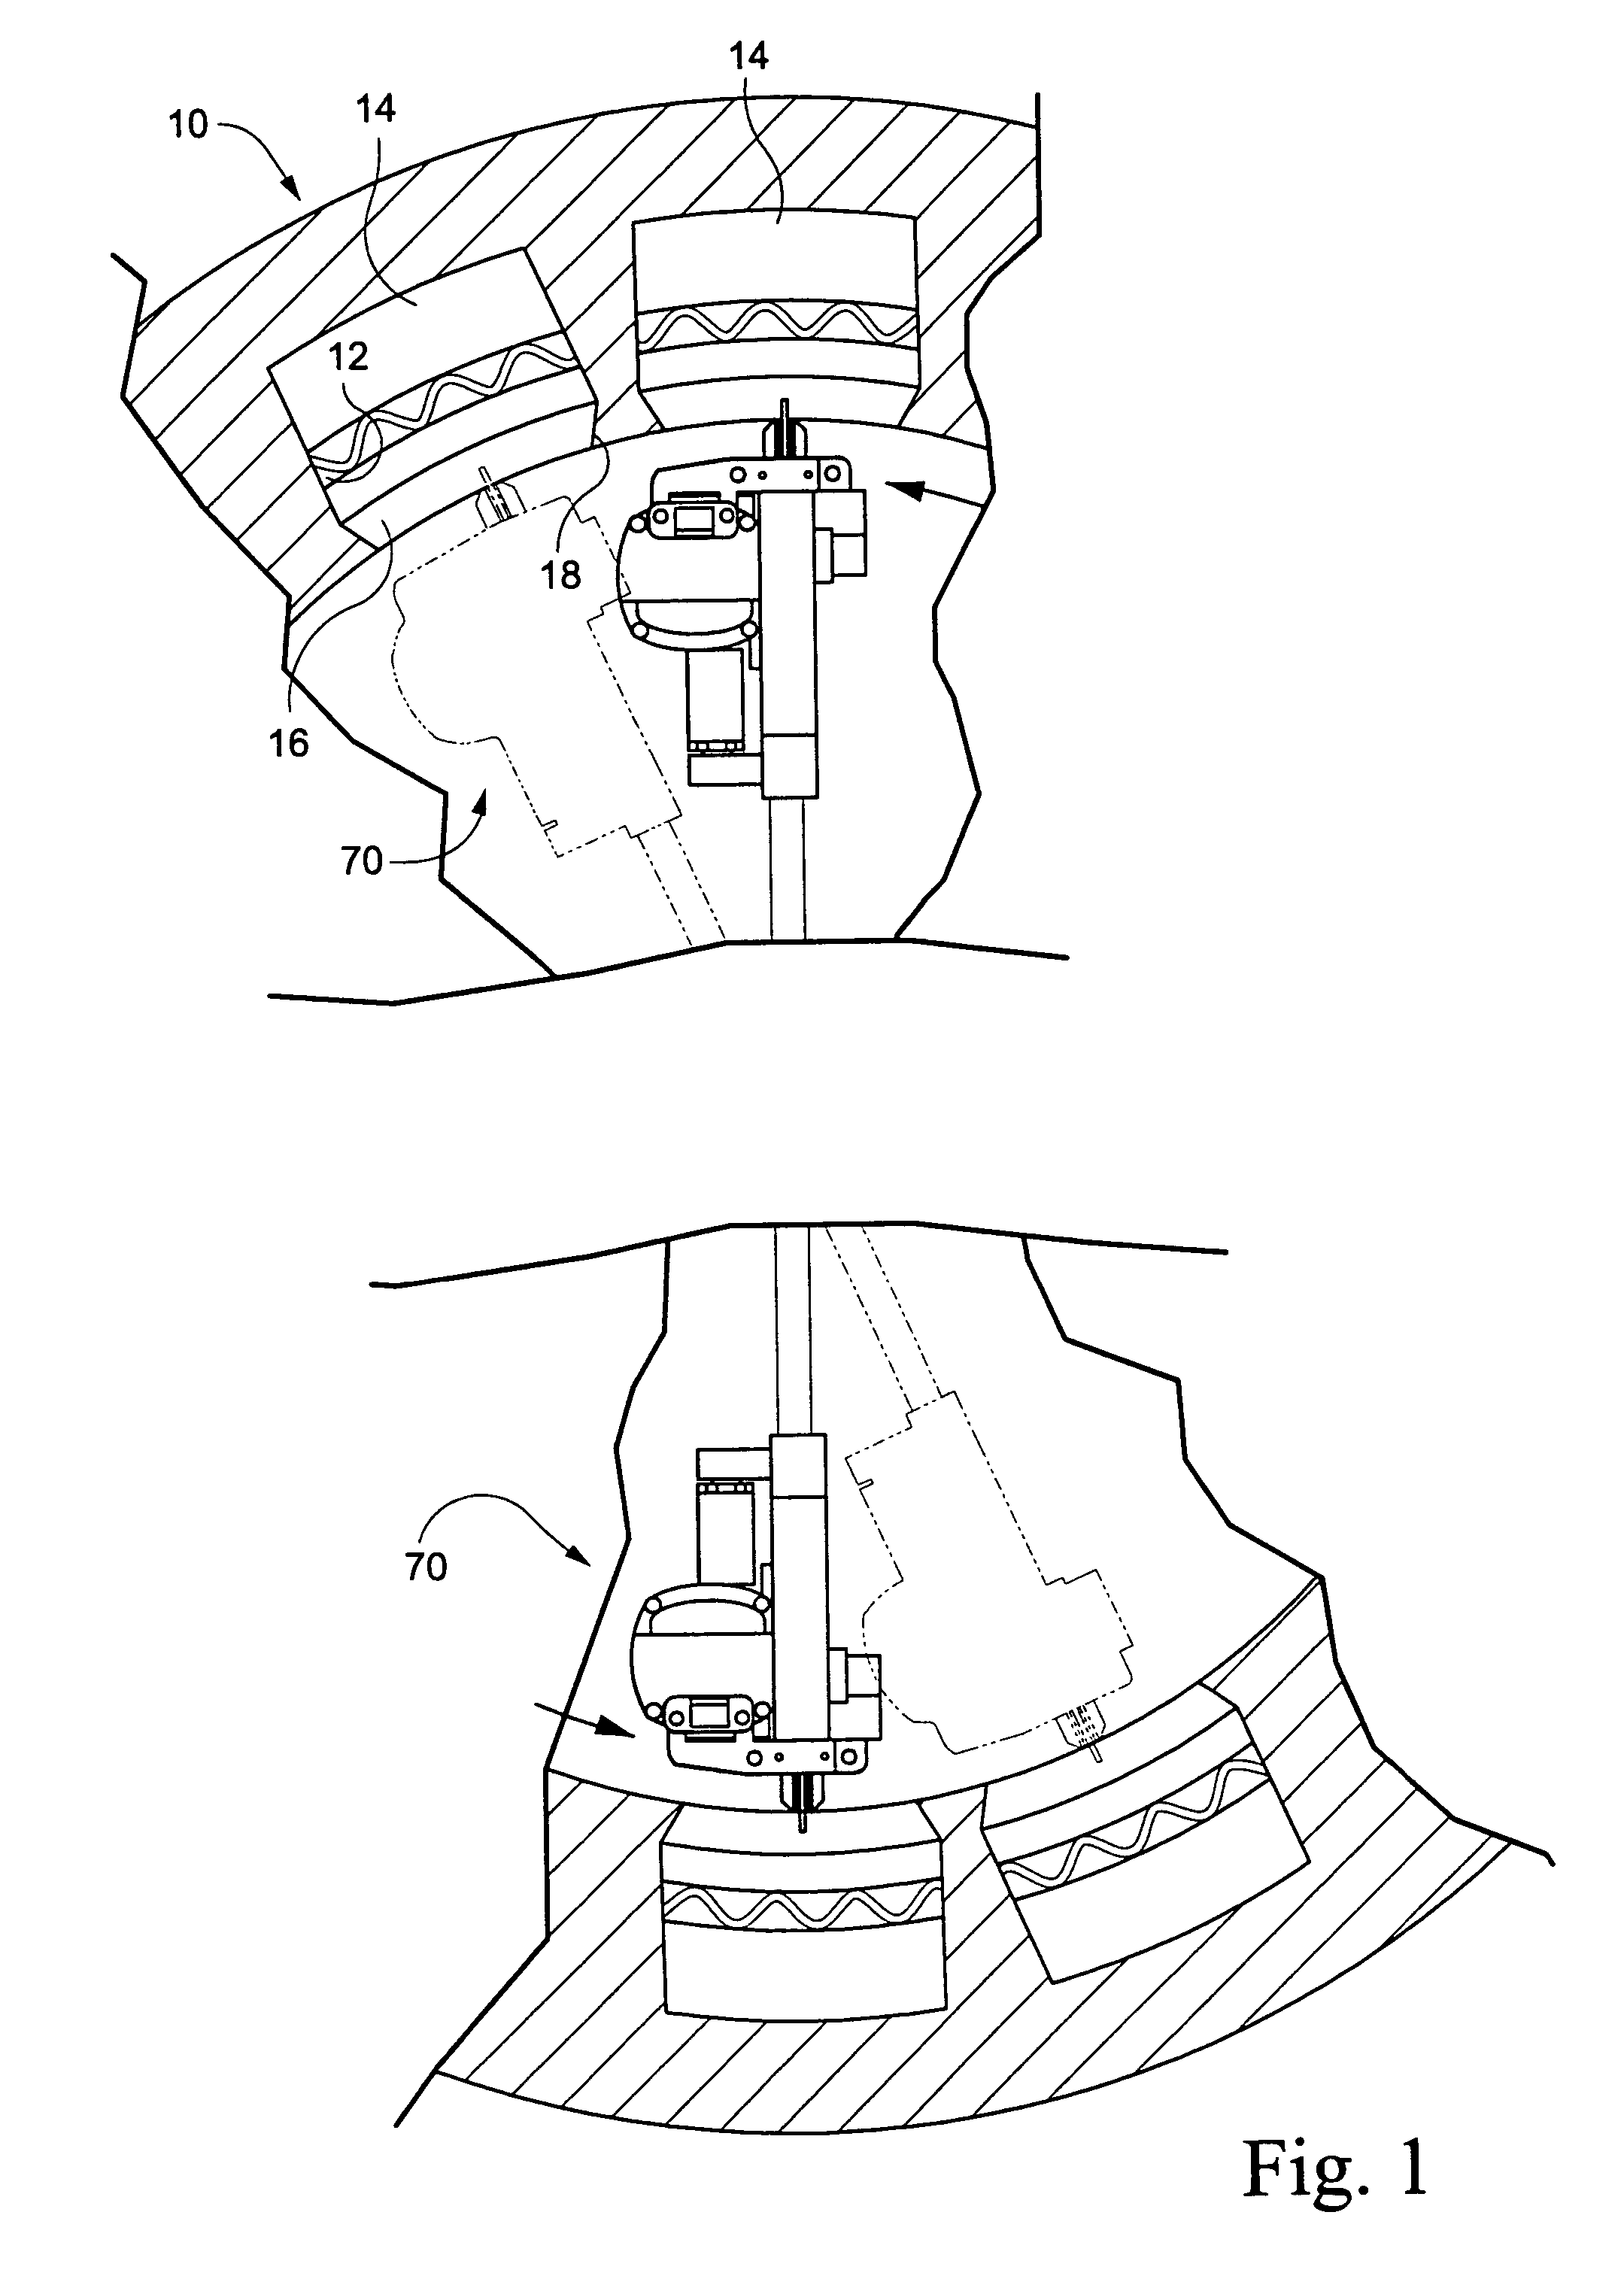 Apparatus for cutting and removing wedges of a stator core of an electrical machine